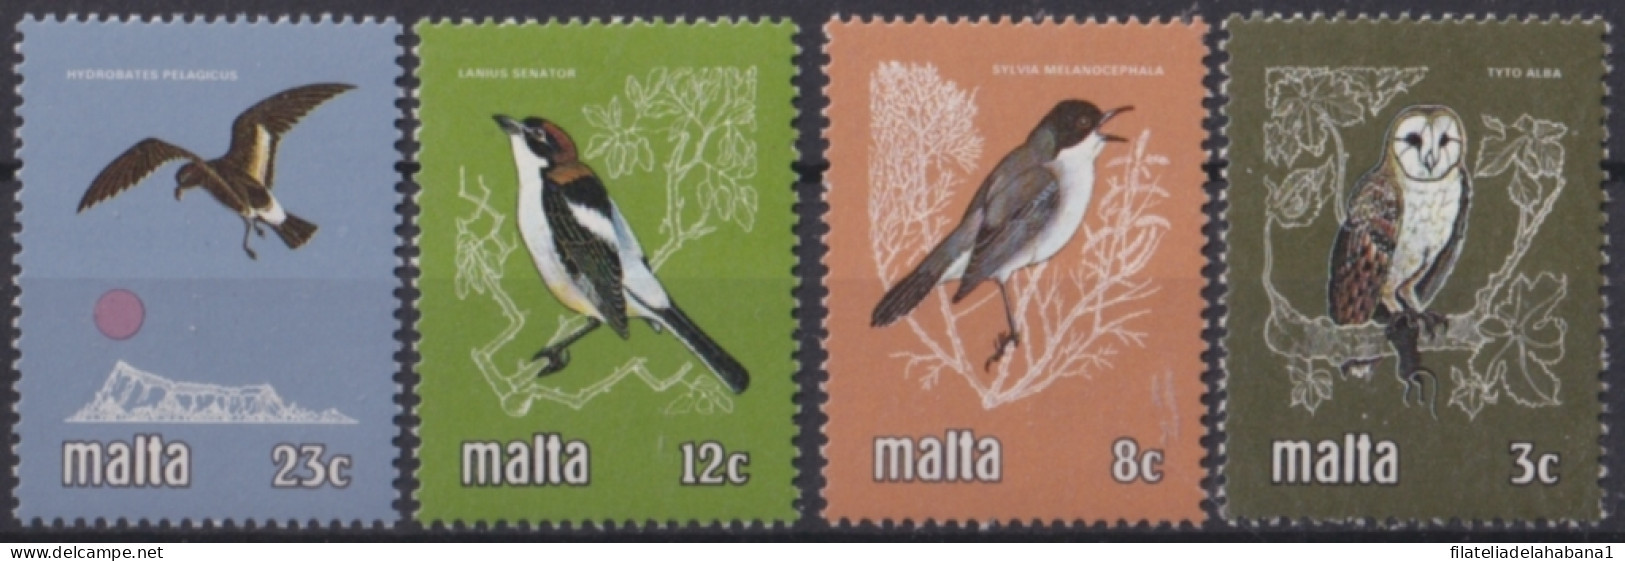 F-EX47947 MALTA MNH 1981 BIRD AVES PAJAROS OISEAUX OWL.  - Collections, Lots & Series